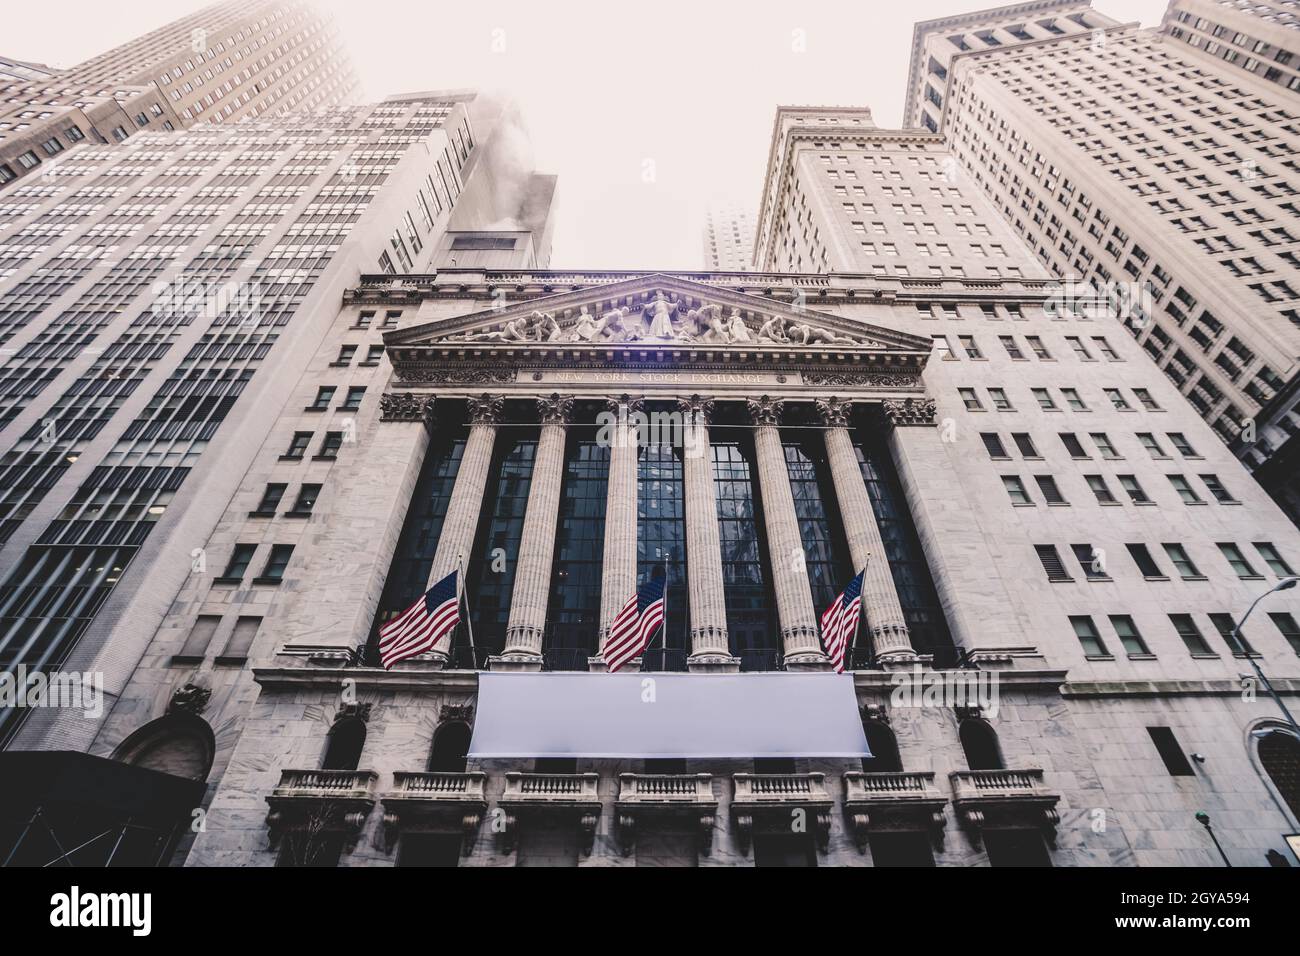 Exterior of New york Stock Exchange, largest stock exchange in world by market capitalization and most powerful global financial institute. Wall stree Stock Photo